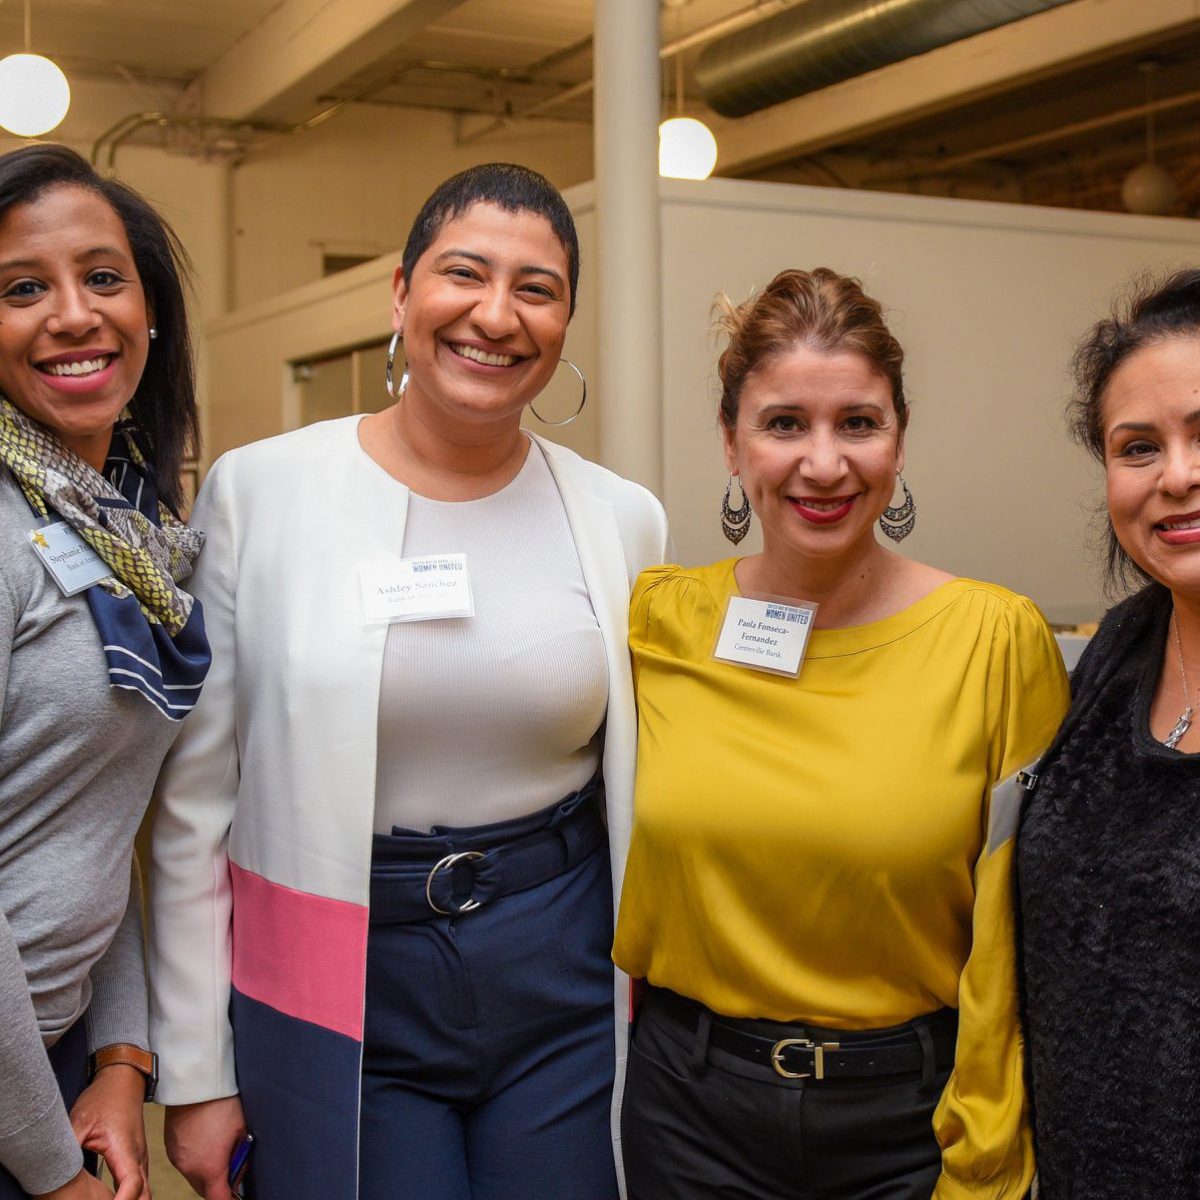 Four smiling Women United members, including (from left to right) Stephanie Pelletier, Ashley Sanchez, and Paola Fonseca-Fernandez.